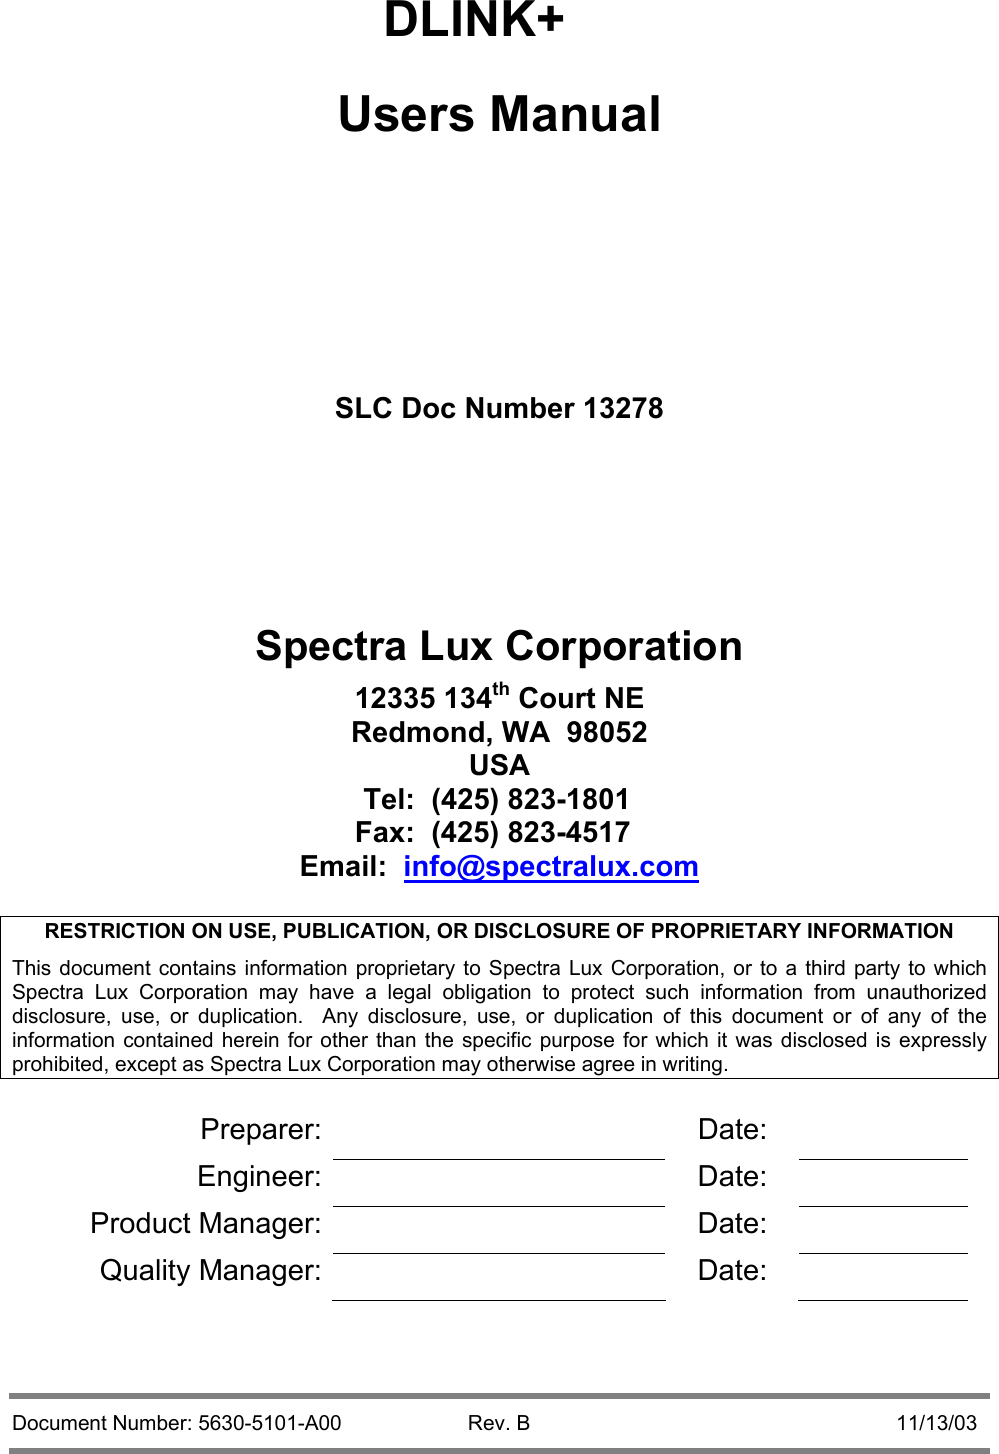  Document Number: 5630-5101-A00  Rev. B  11/13/03     DLINK+ Users Manual    SLC Doc Number 13278     Spectra Lux Corporation 12335 134th Court NE Redmond, WA  98052 USA Tel:  (425) 823-1801 Fax:  (425) 823-4517 Email:  info@spectralux.com  RESTRICTION ON USE, PUBLICATION, OR DISCLOSURE OF PROPRIETARY INFORMATION This document contains information proprietary to Spectra Lux Corporation, or to a third party to which Spectra Lux Corporation may have a legal obligation to protect such information from unauthorized disclosure, use, or duplication.  Any disclosure, use, or duplication of this document or of any of the information contained herein for other than the specific purpose for which it was disclosed is expressly prohibited, except as Spectra Lux Corporation may otherwise agree in writing.  Preparer:   Date:  Engineer:   Date:  Product Manager:    Date:   Quality Manager:    Date:     